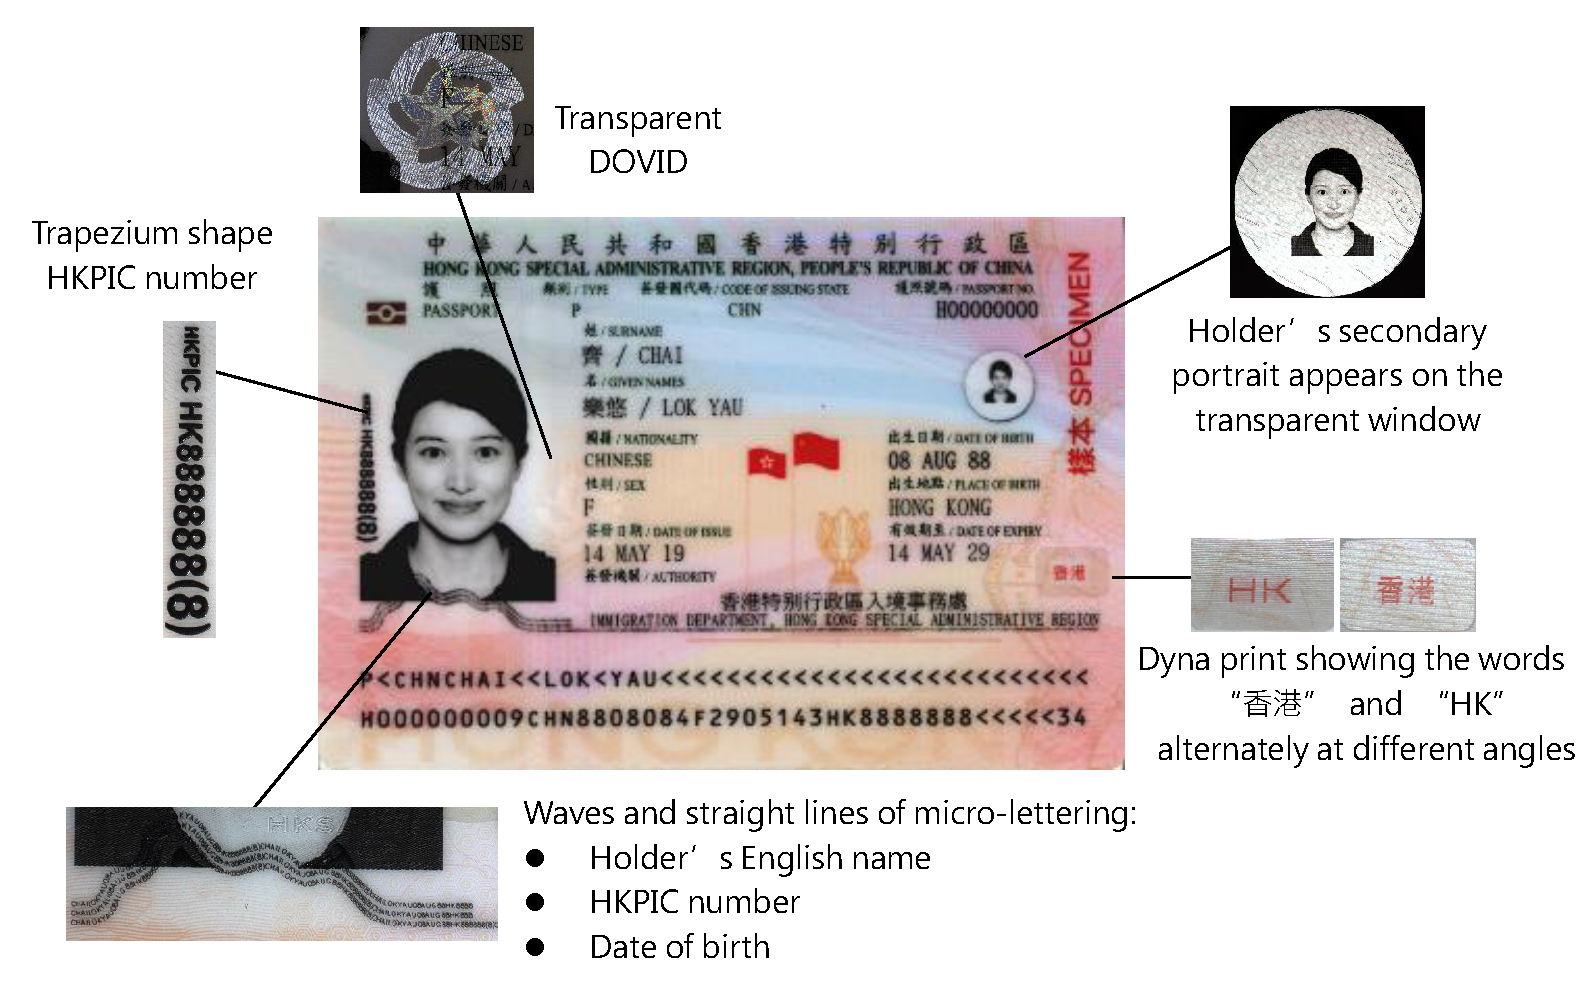 Physical Features and Design of Electronic Passport | Immigration